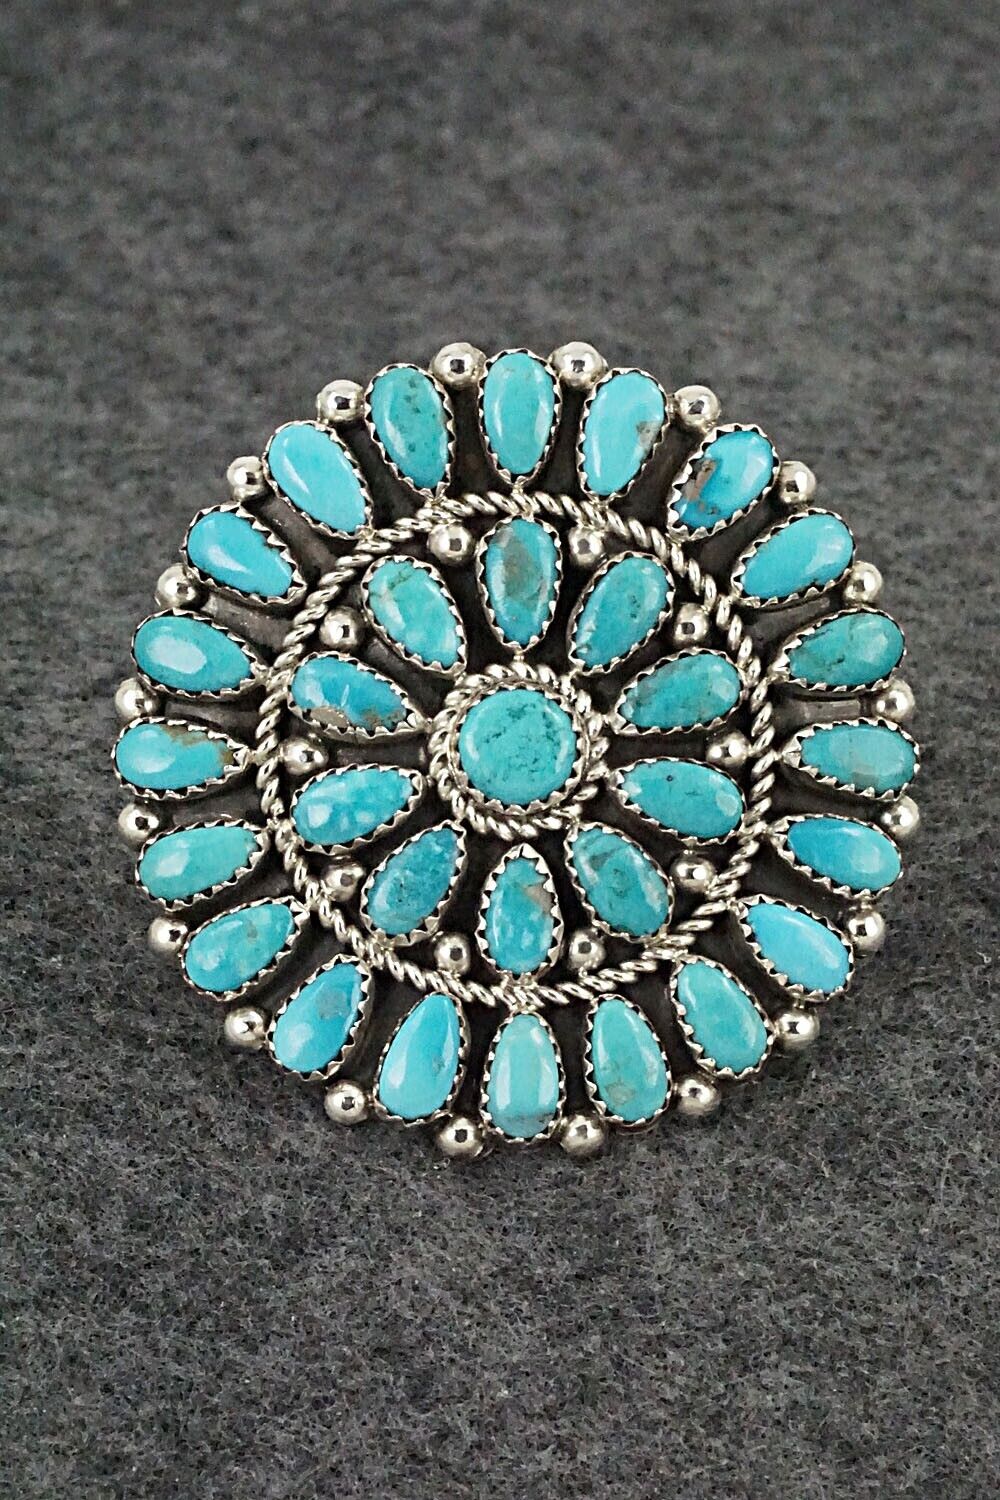 Turquoise & Sterling Silver Ring - Rodney Notah - Size 7.75